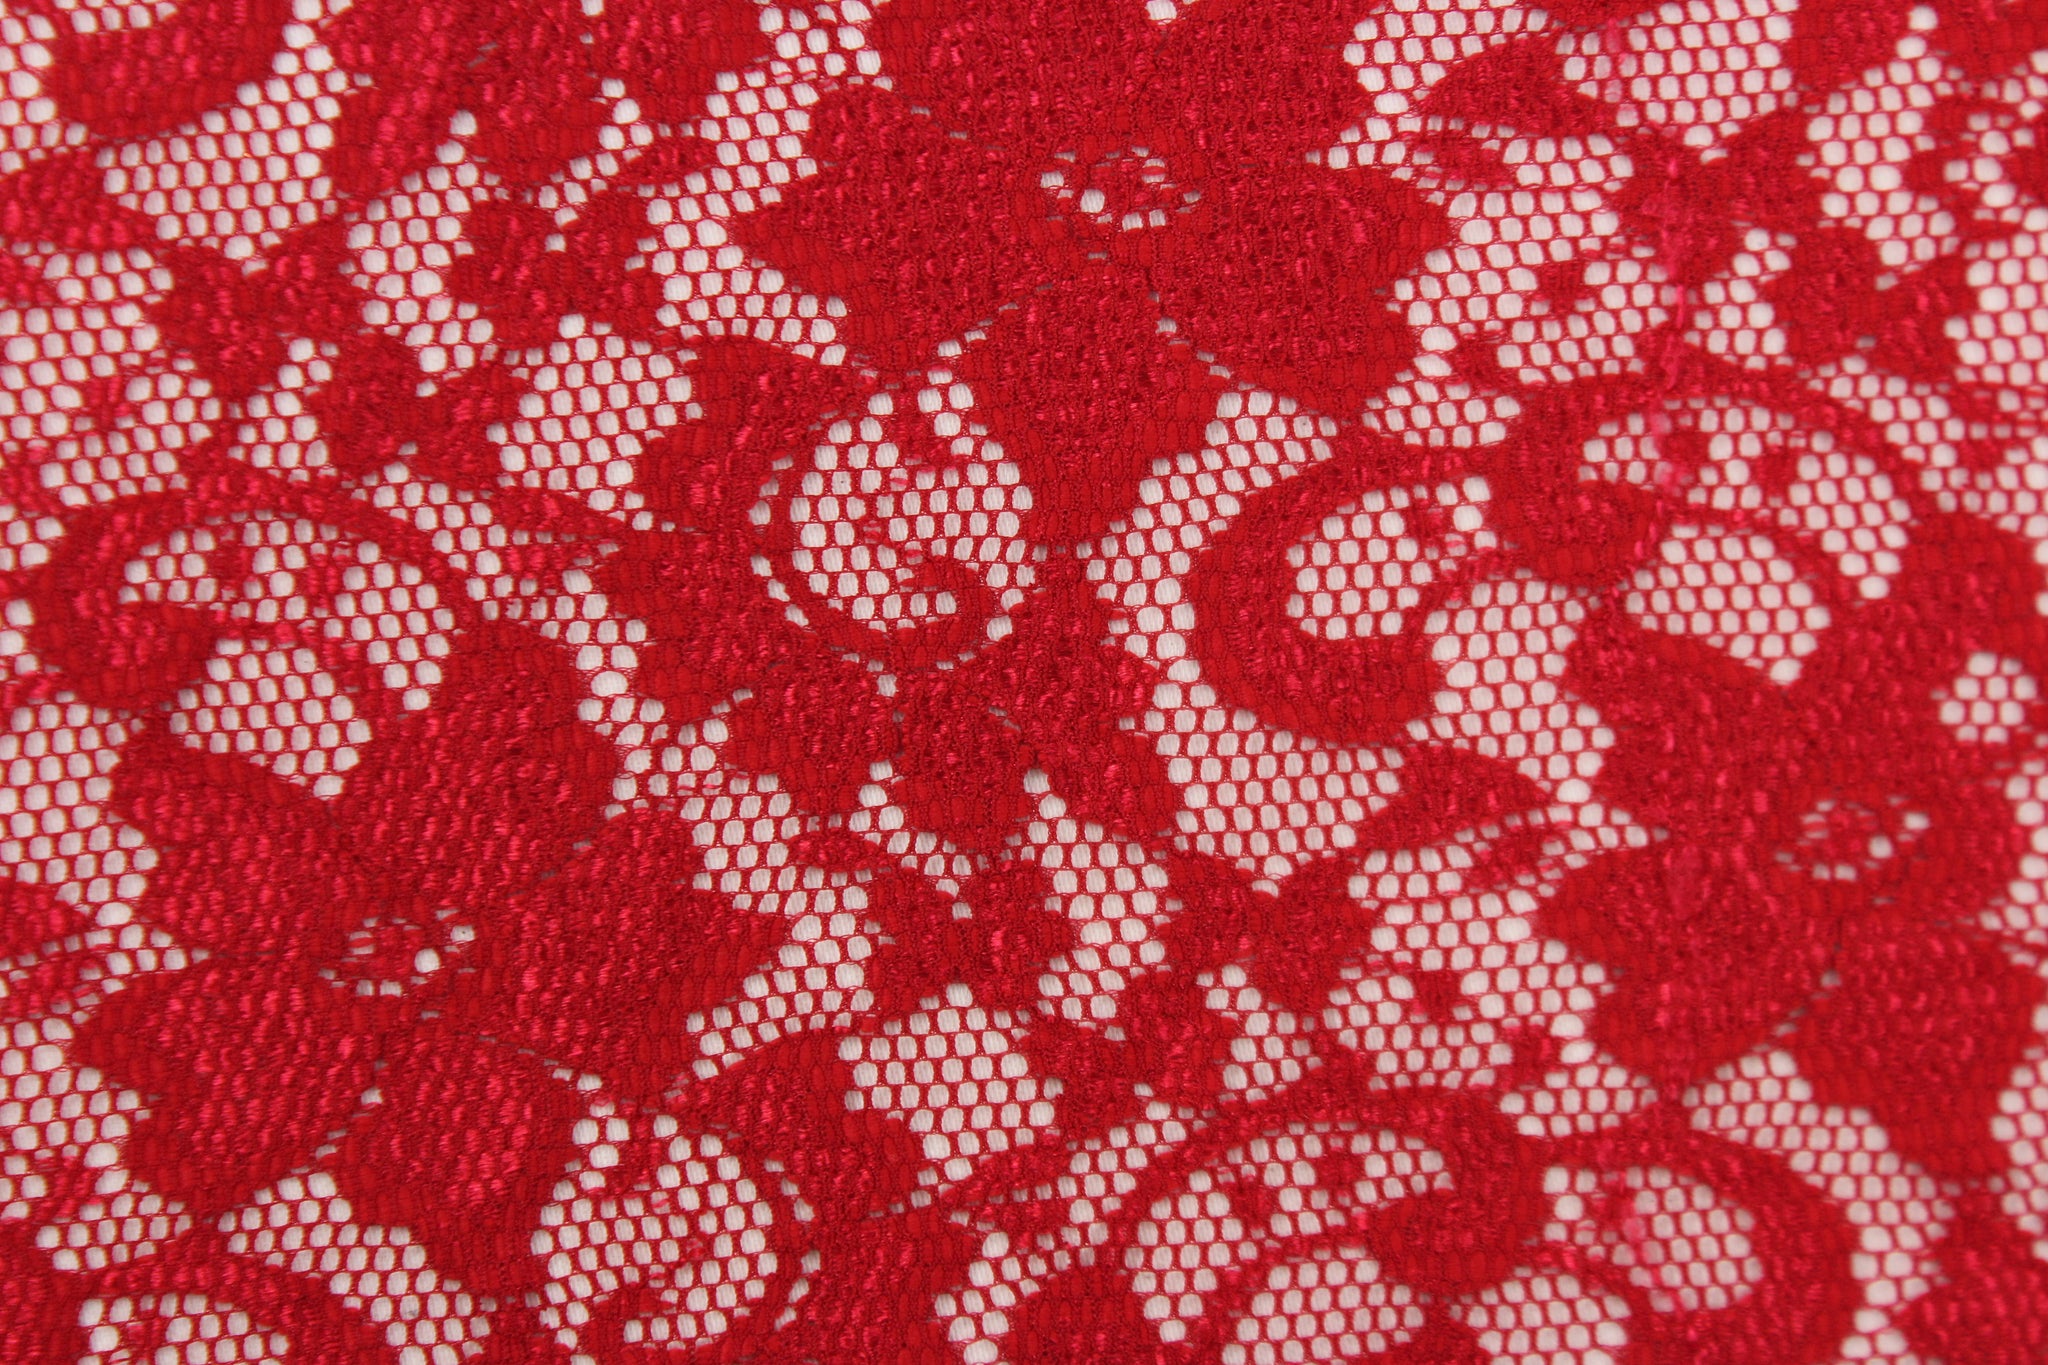 Katerina Red Floral Stretch Lace - Lace - Other Fabrics - Fashion